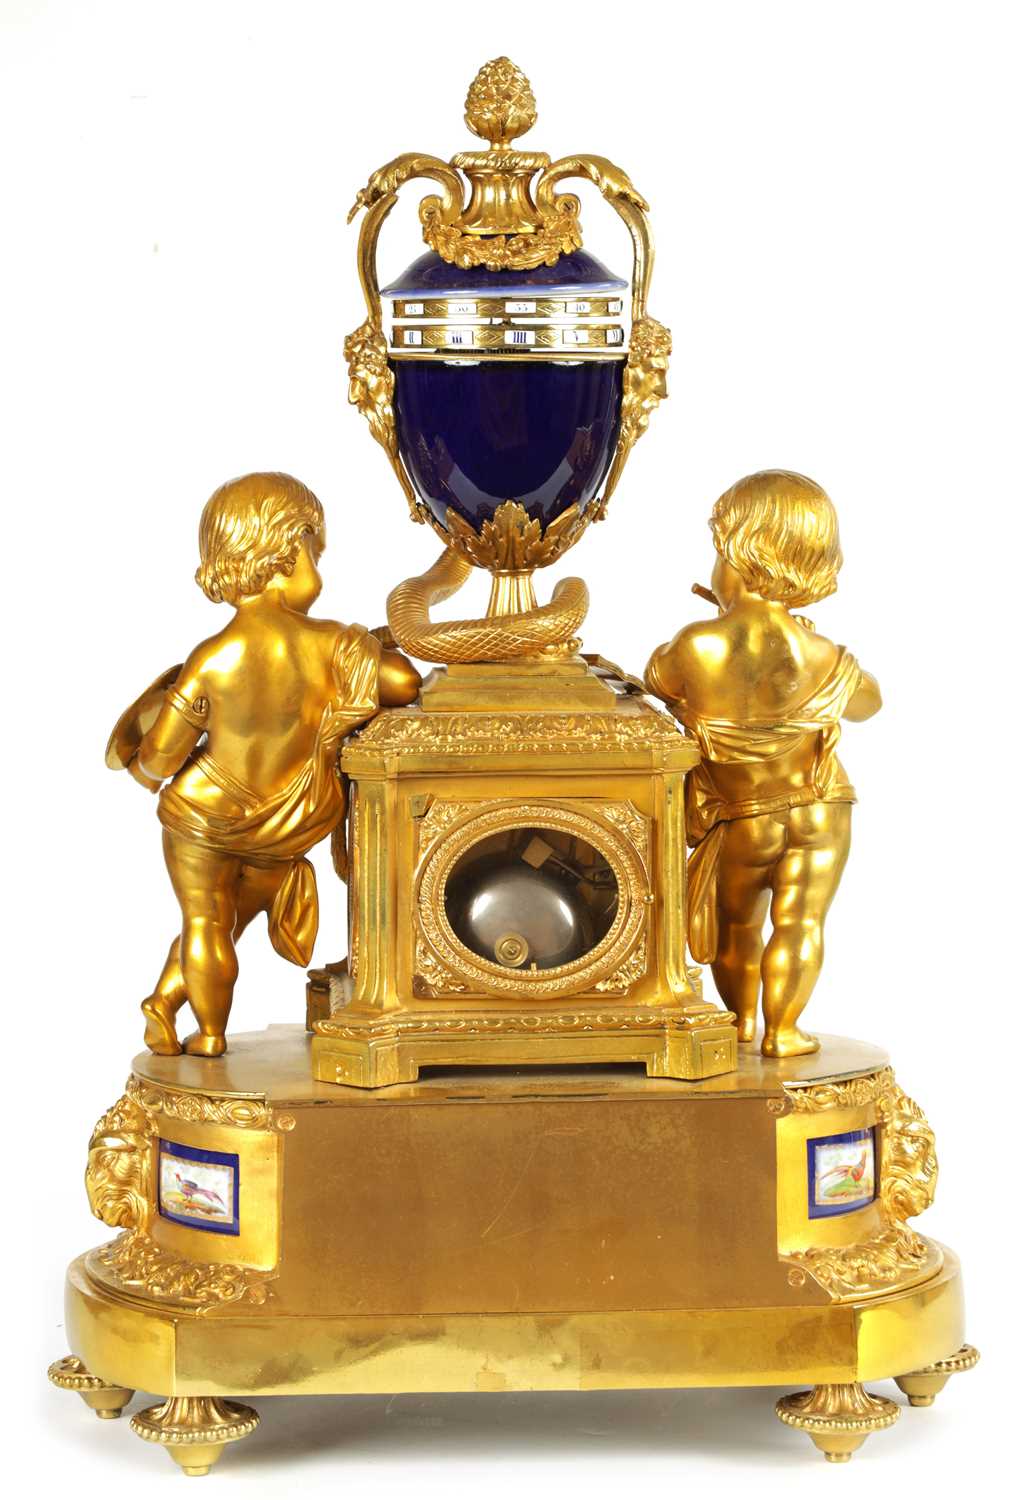 A FINE MID 19TH FRENCH ORMOLU AND 'SEVRES' PORCELAIN MOUNTED REVOLVING URN CLOCK - Image 11 of 13